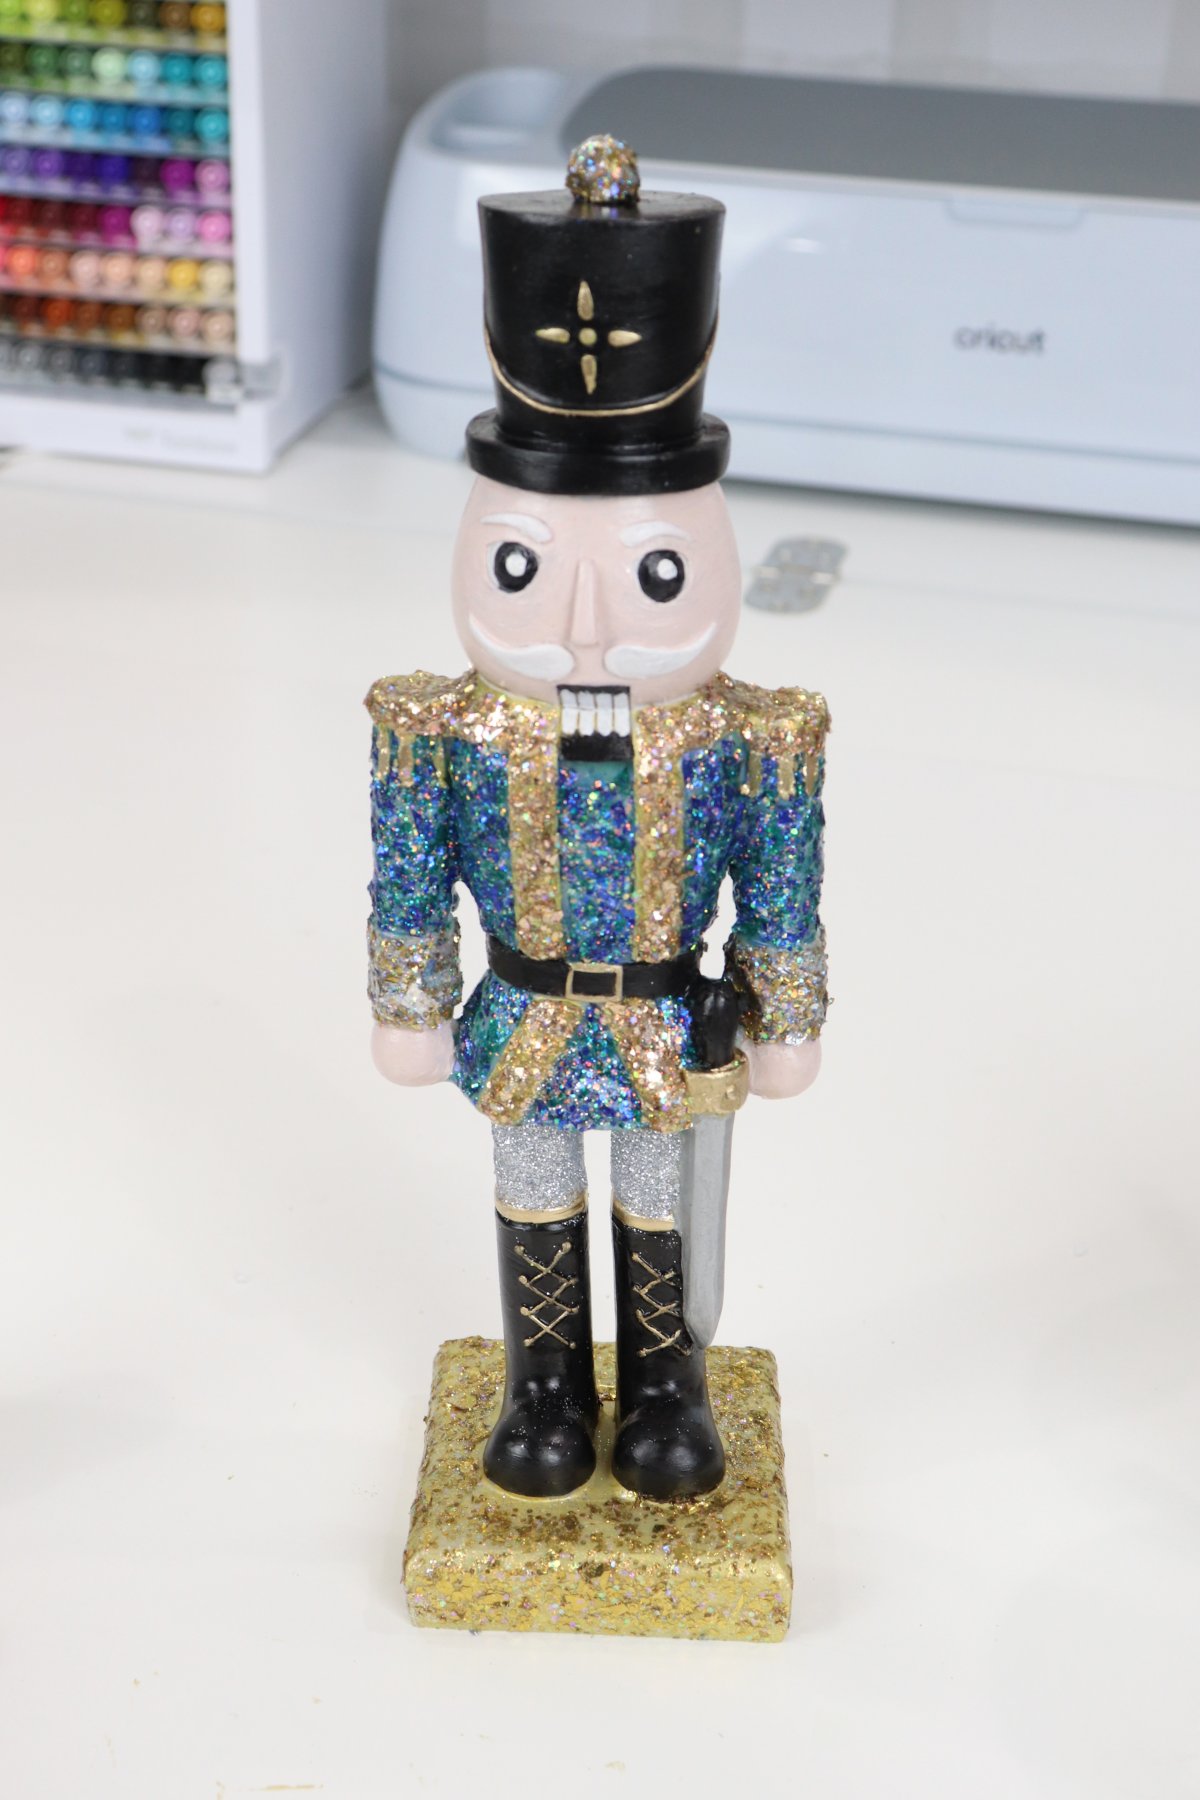 Image contains a handpainted Nutcracker figurine with a black hat and a glittered blue and gold jacket.